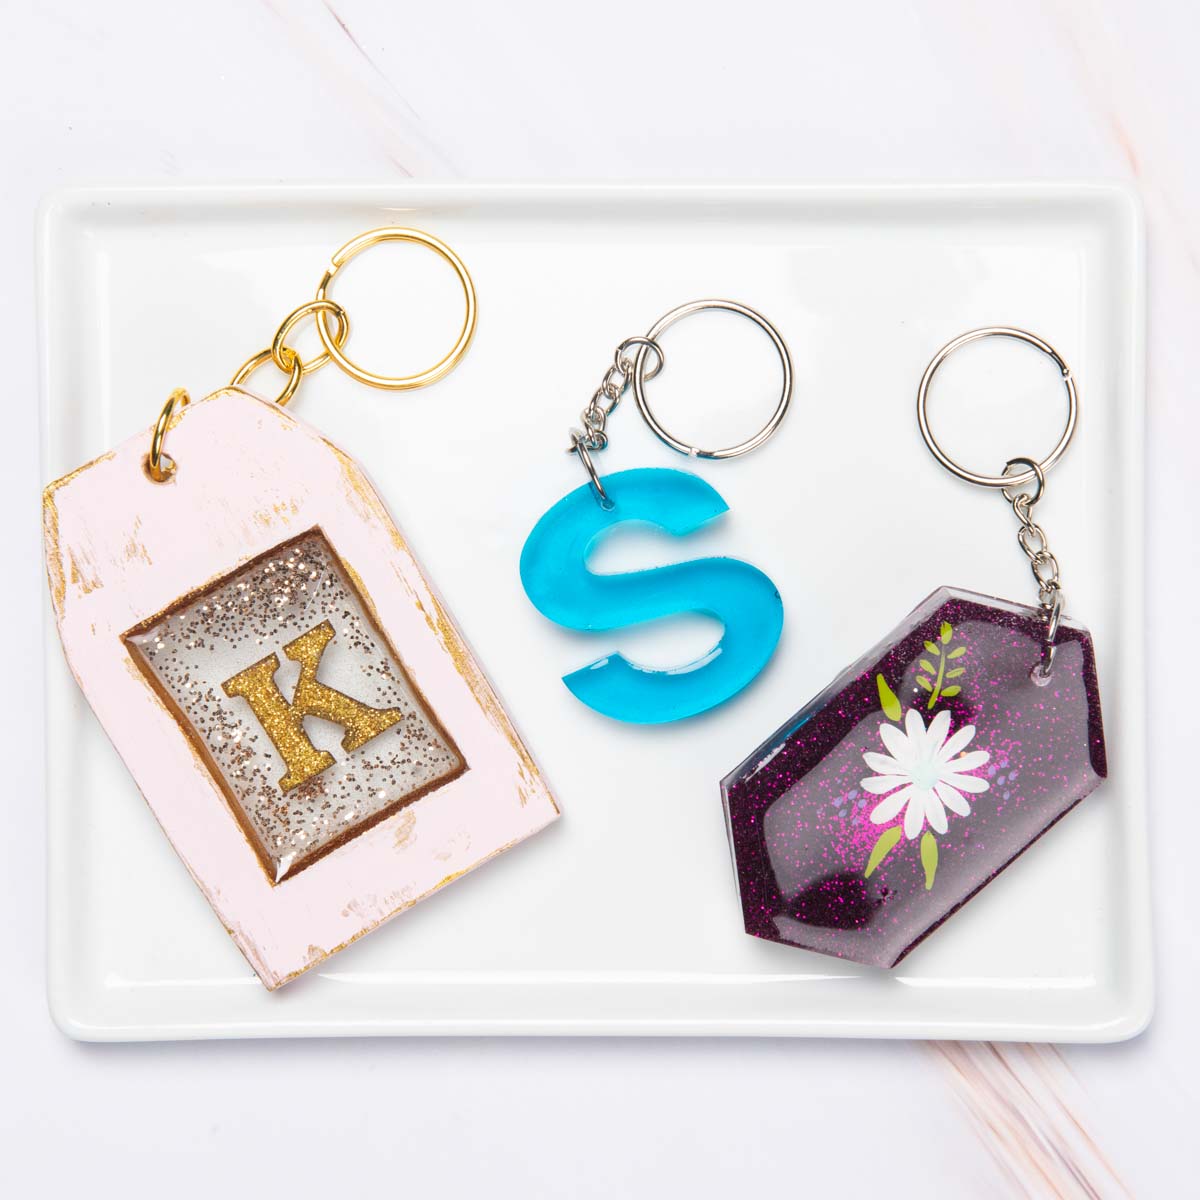 DIY resin keychains in various colors